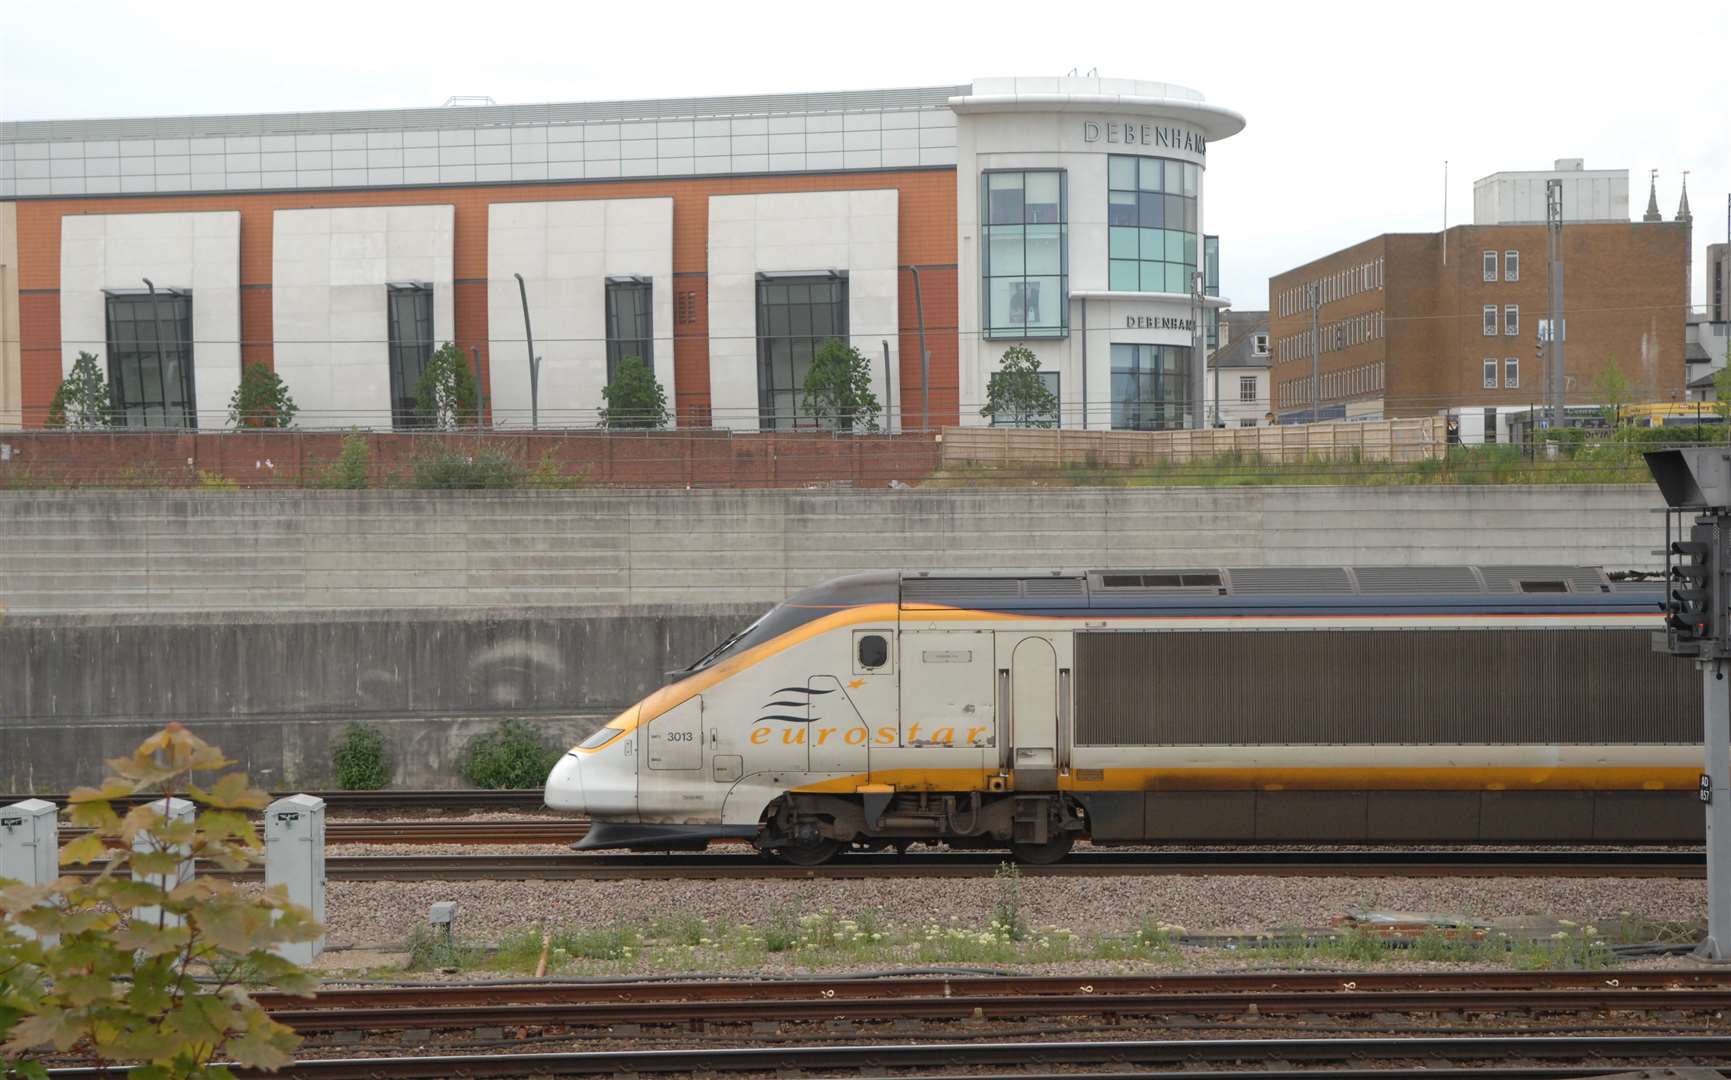 Eurostar has stopped at Ashford for years - as this 2010 photo shows